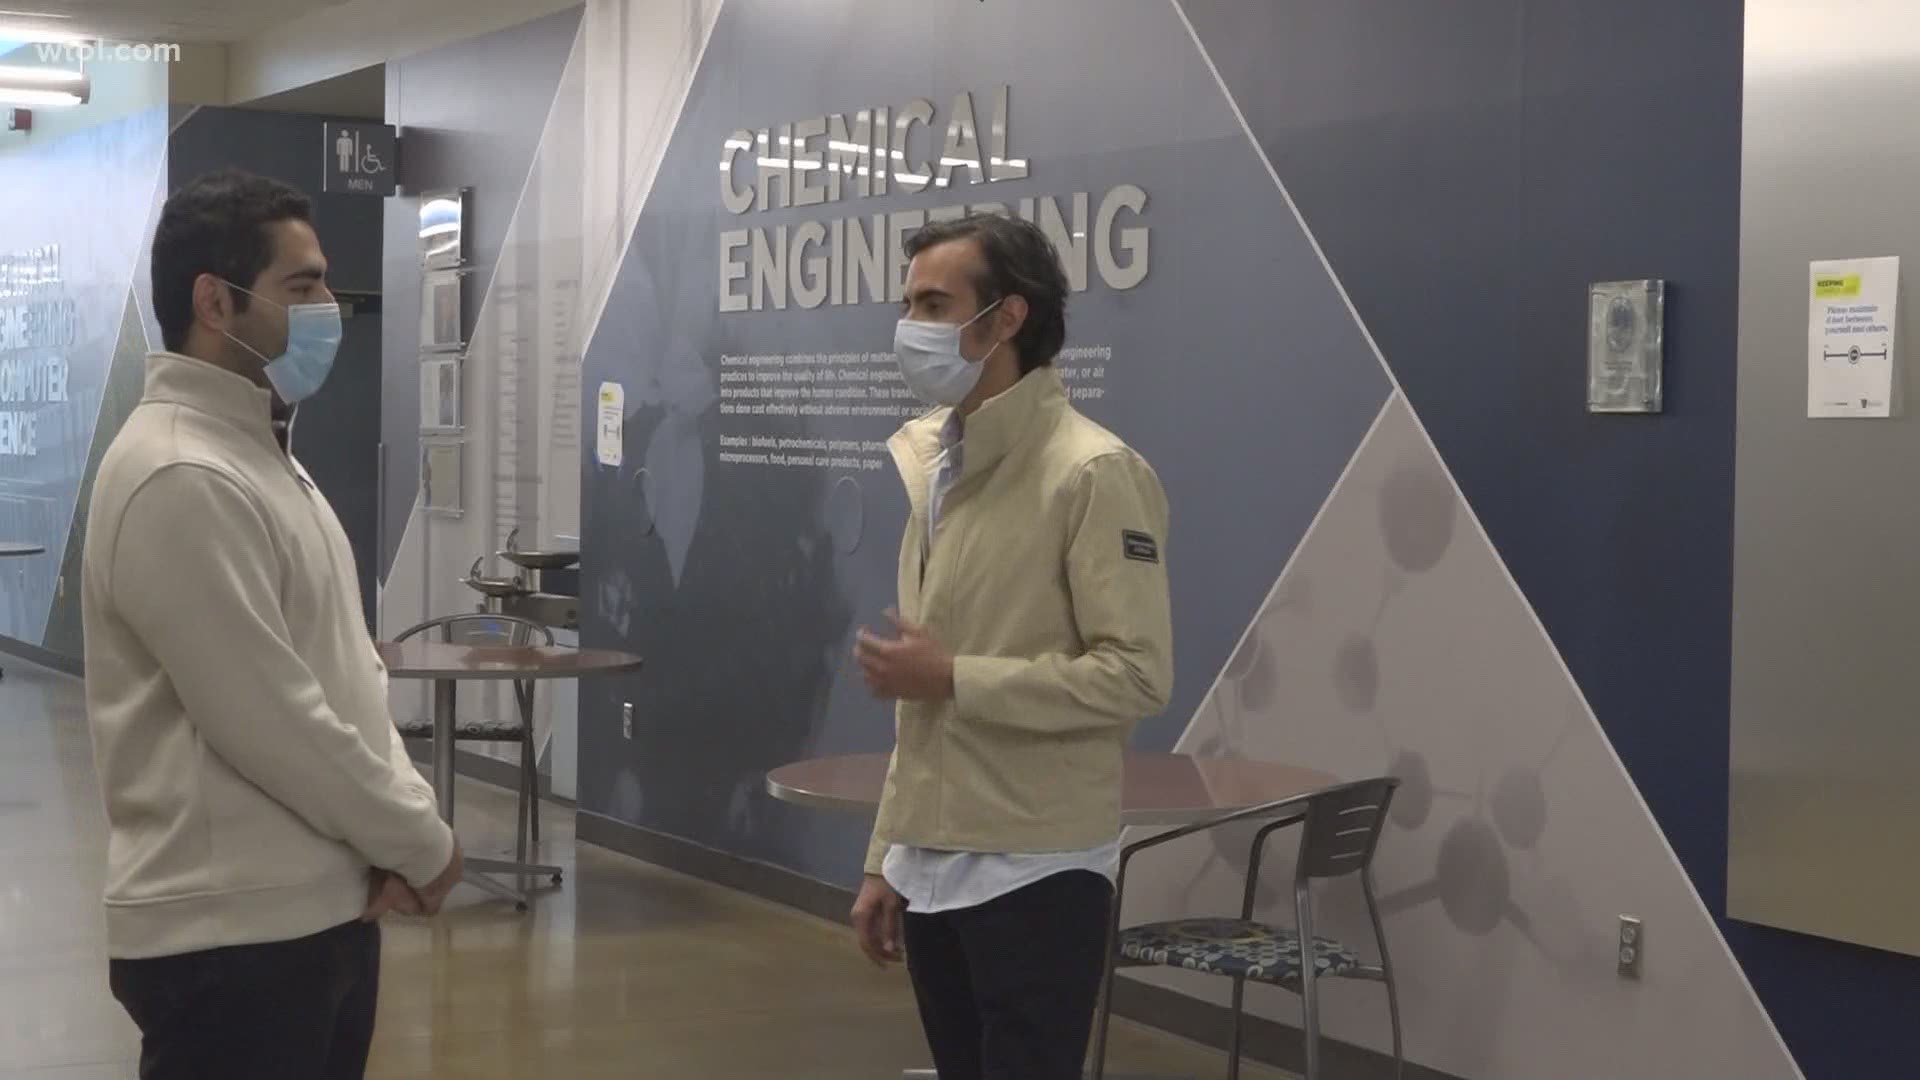 Two UToledo students are using their talents to help hospitals during the ongoing pandemic. They've developed a model to predict COVID-19 hospital stays.